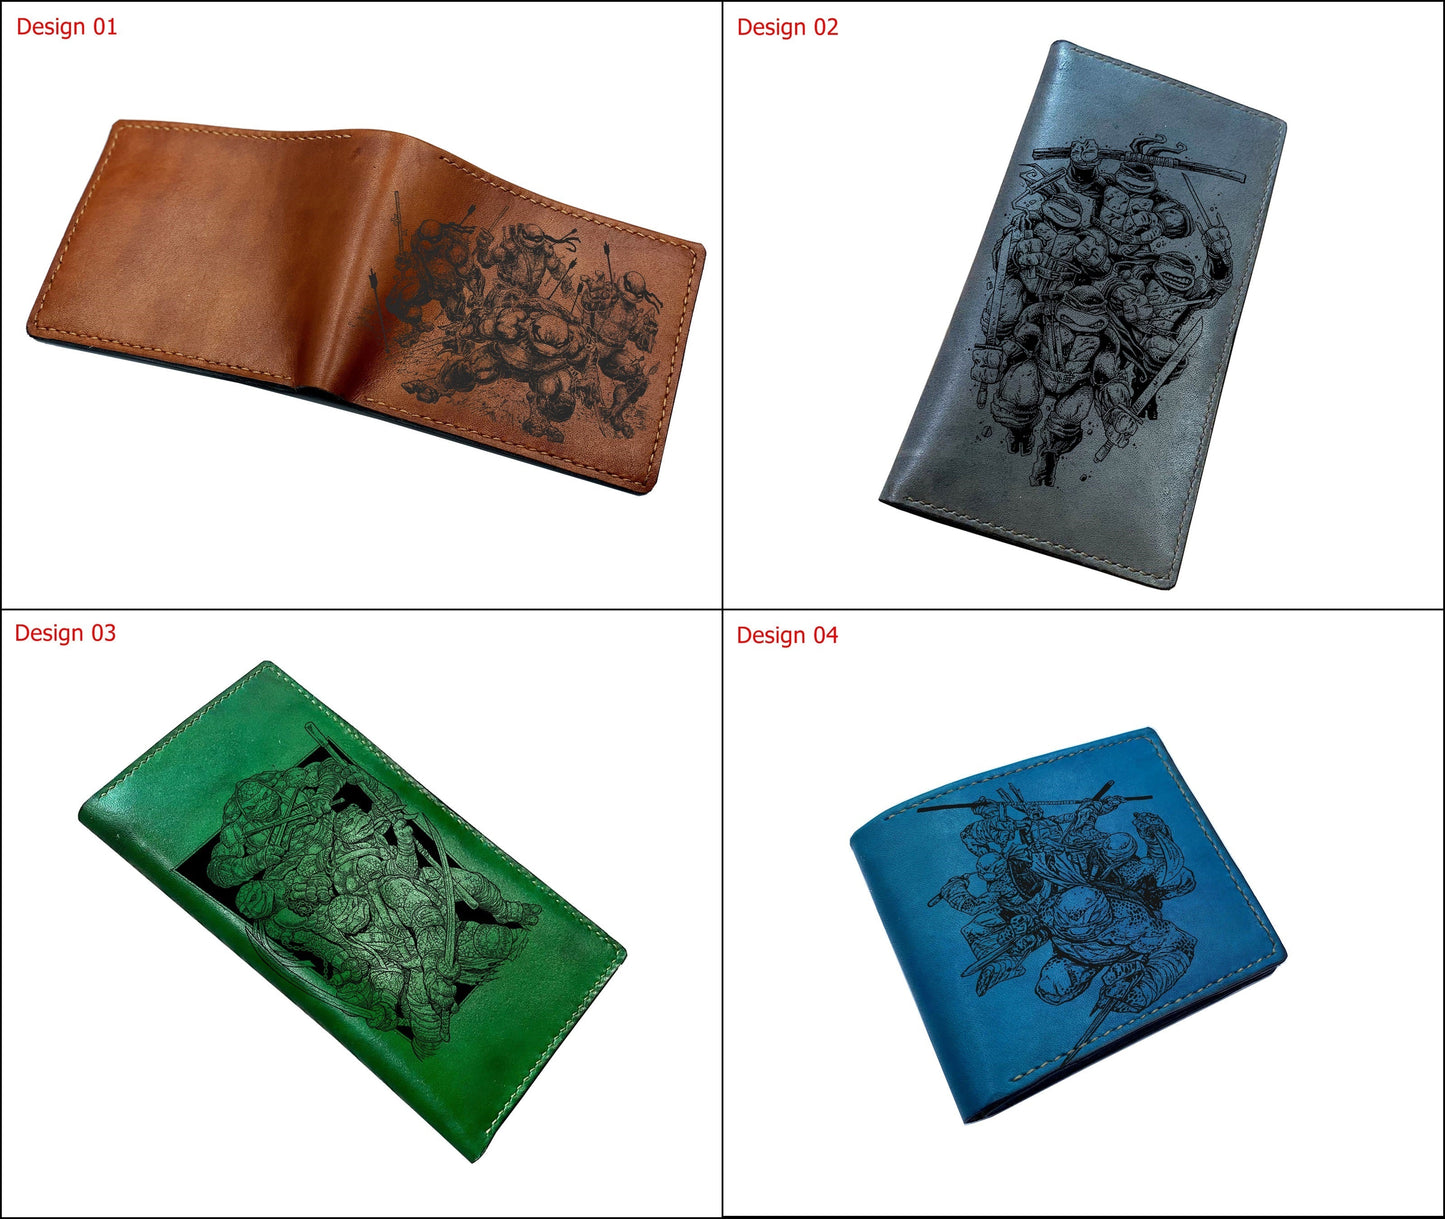 Mayan Corner - Personalized genuine leather handmade wallet, leather gift ideas for him, ninja turtle leather art wallet - 01112214